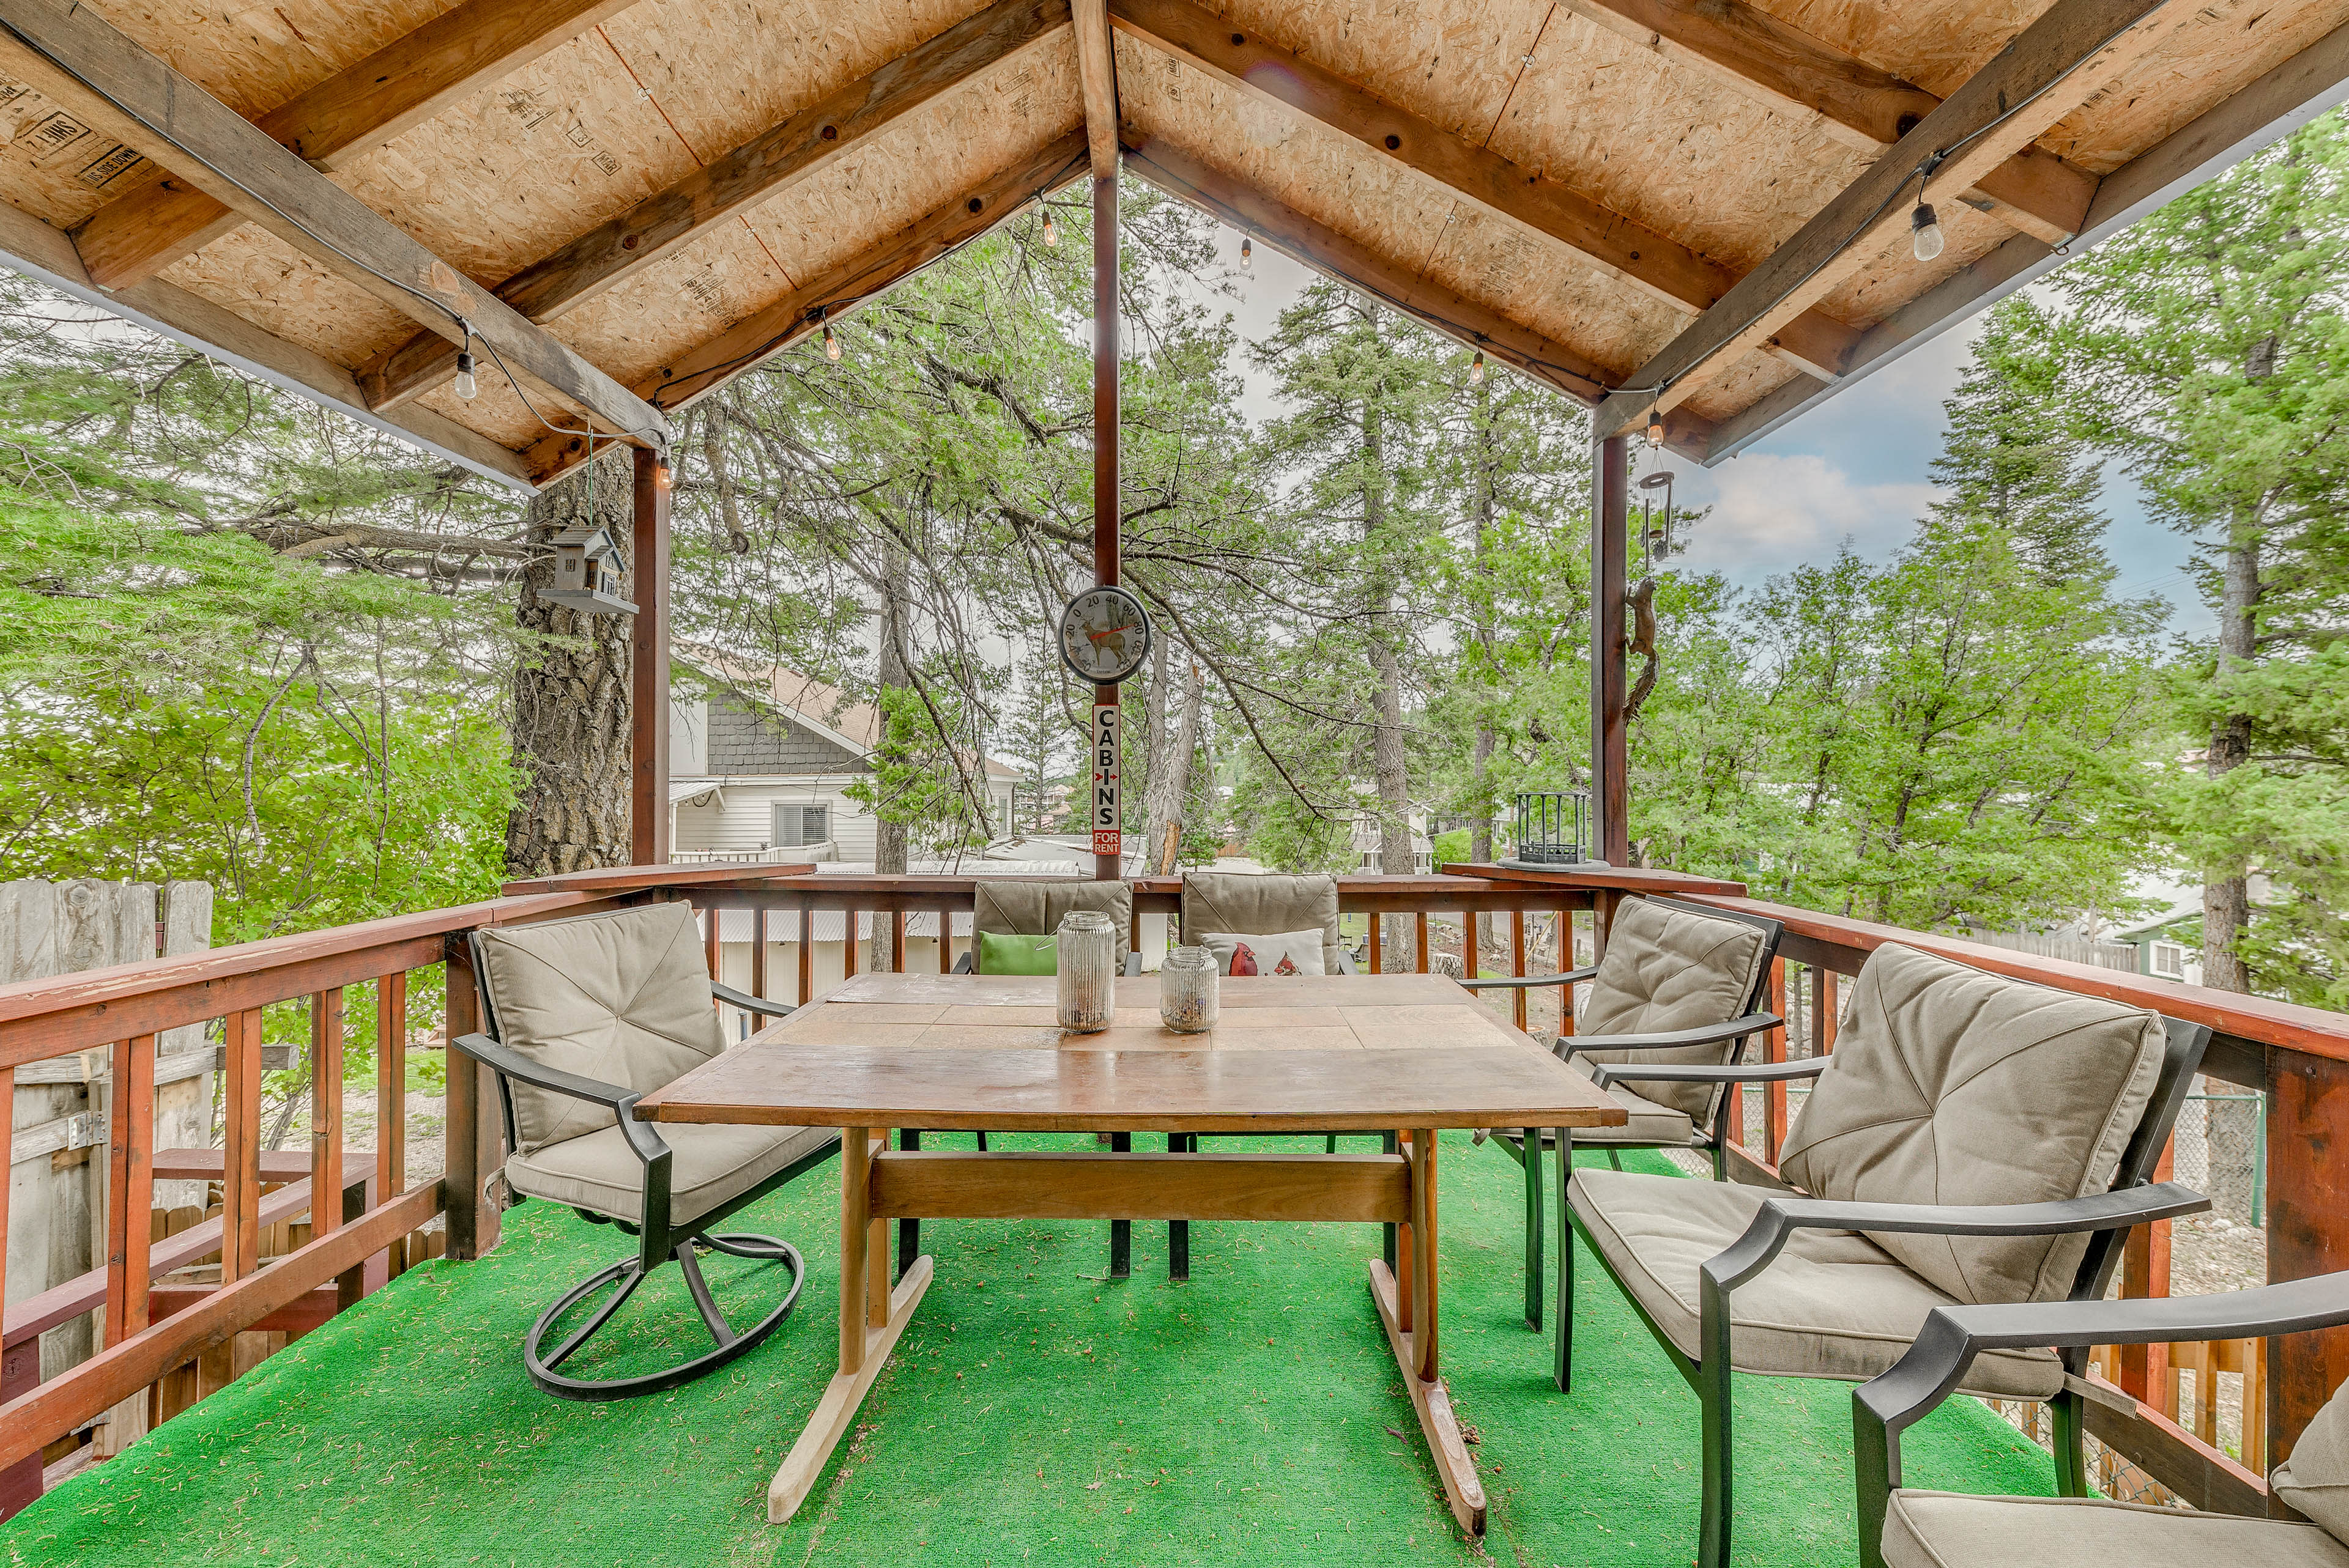 Covered Deck | Pets Welcome w/ Fee (Paid Pre-Trip)